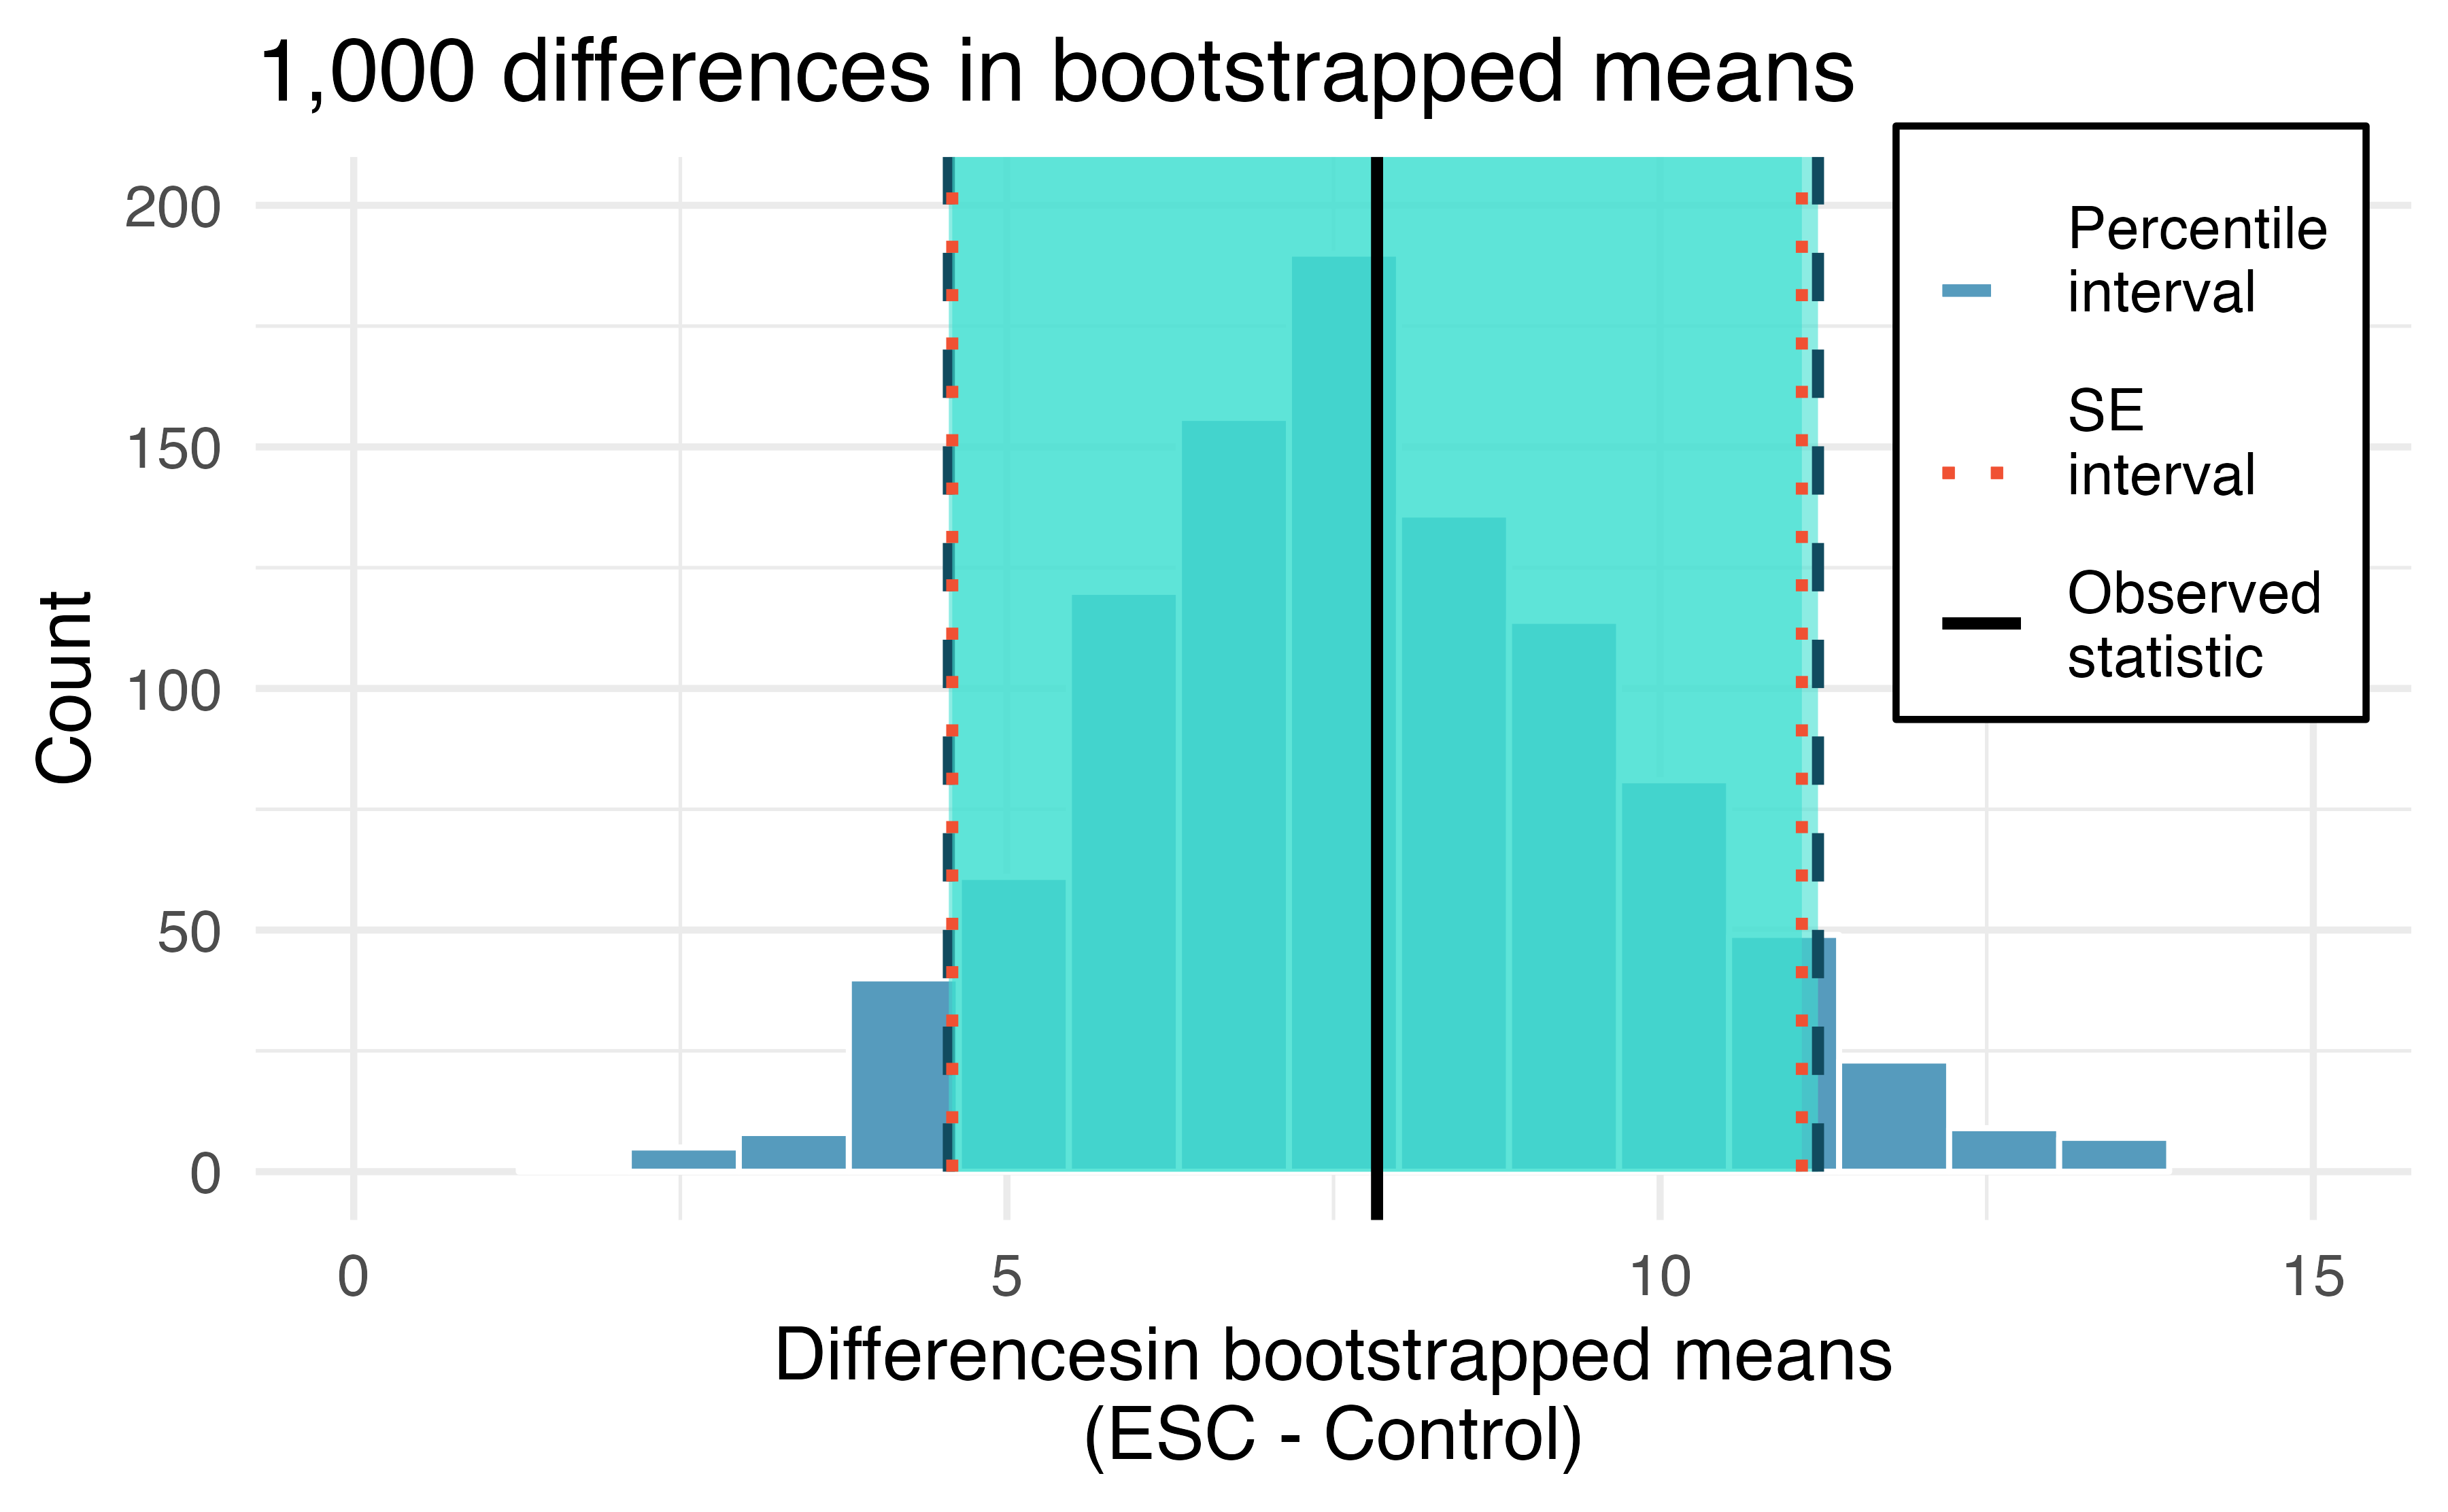 Histogram of differences in means after 1,000 bootstrap samples from each of the two groups. The observed difference is plotted as a black vertical line at 7.83. The blue dashed and red dotted lines provide the bootstrap percentile and boostrap SE confidence intervals, respectively, for the difference in true population means.